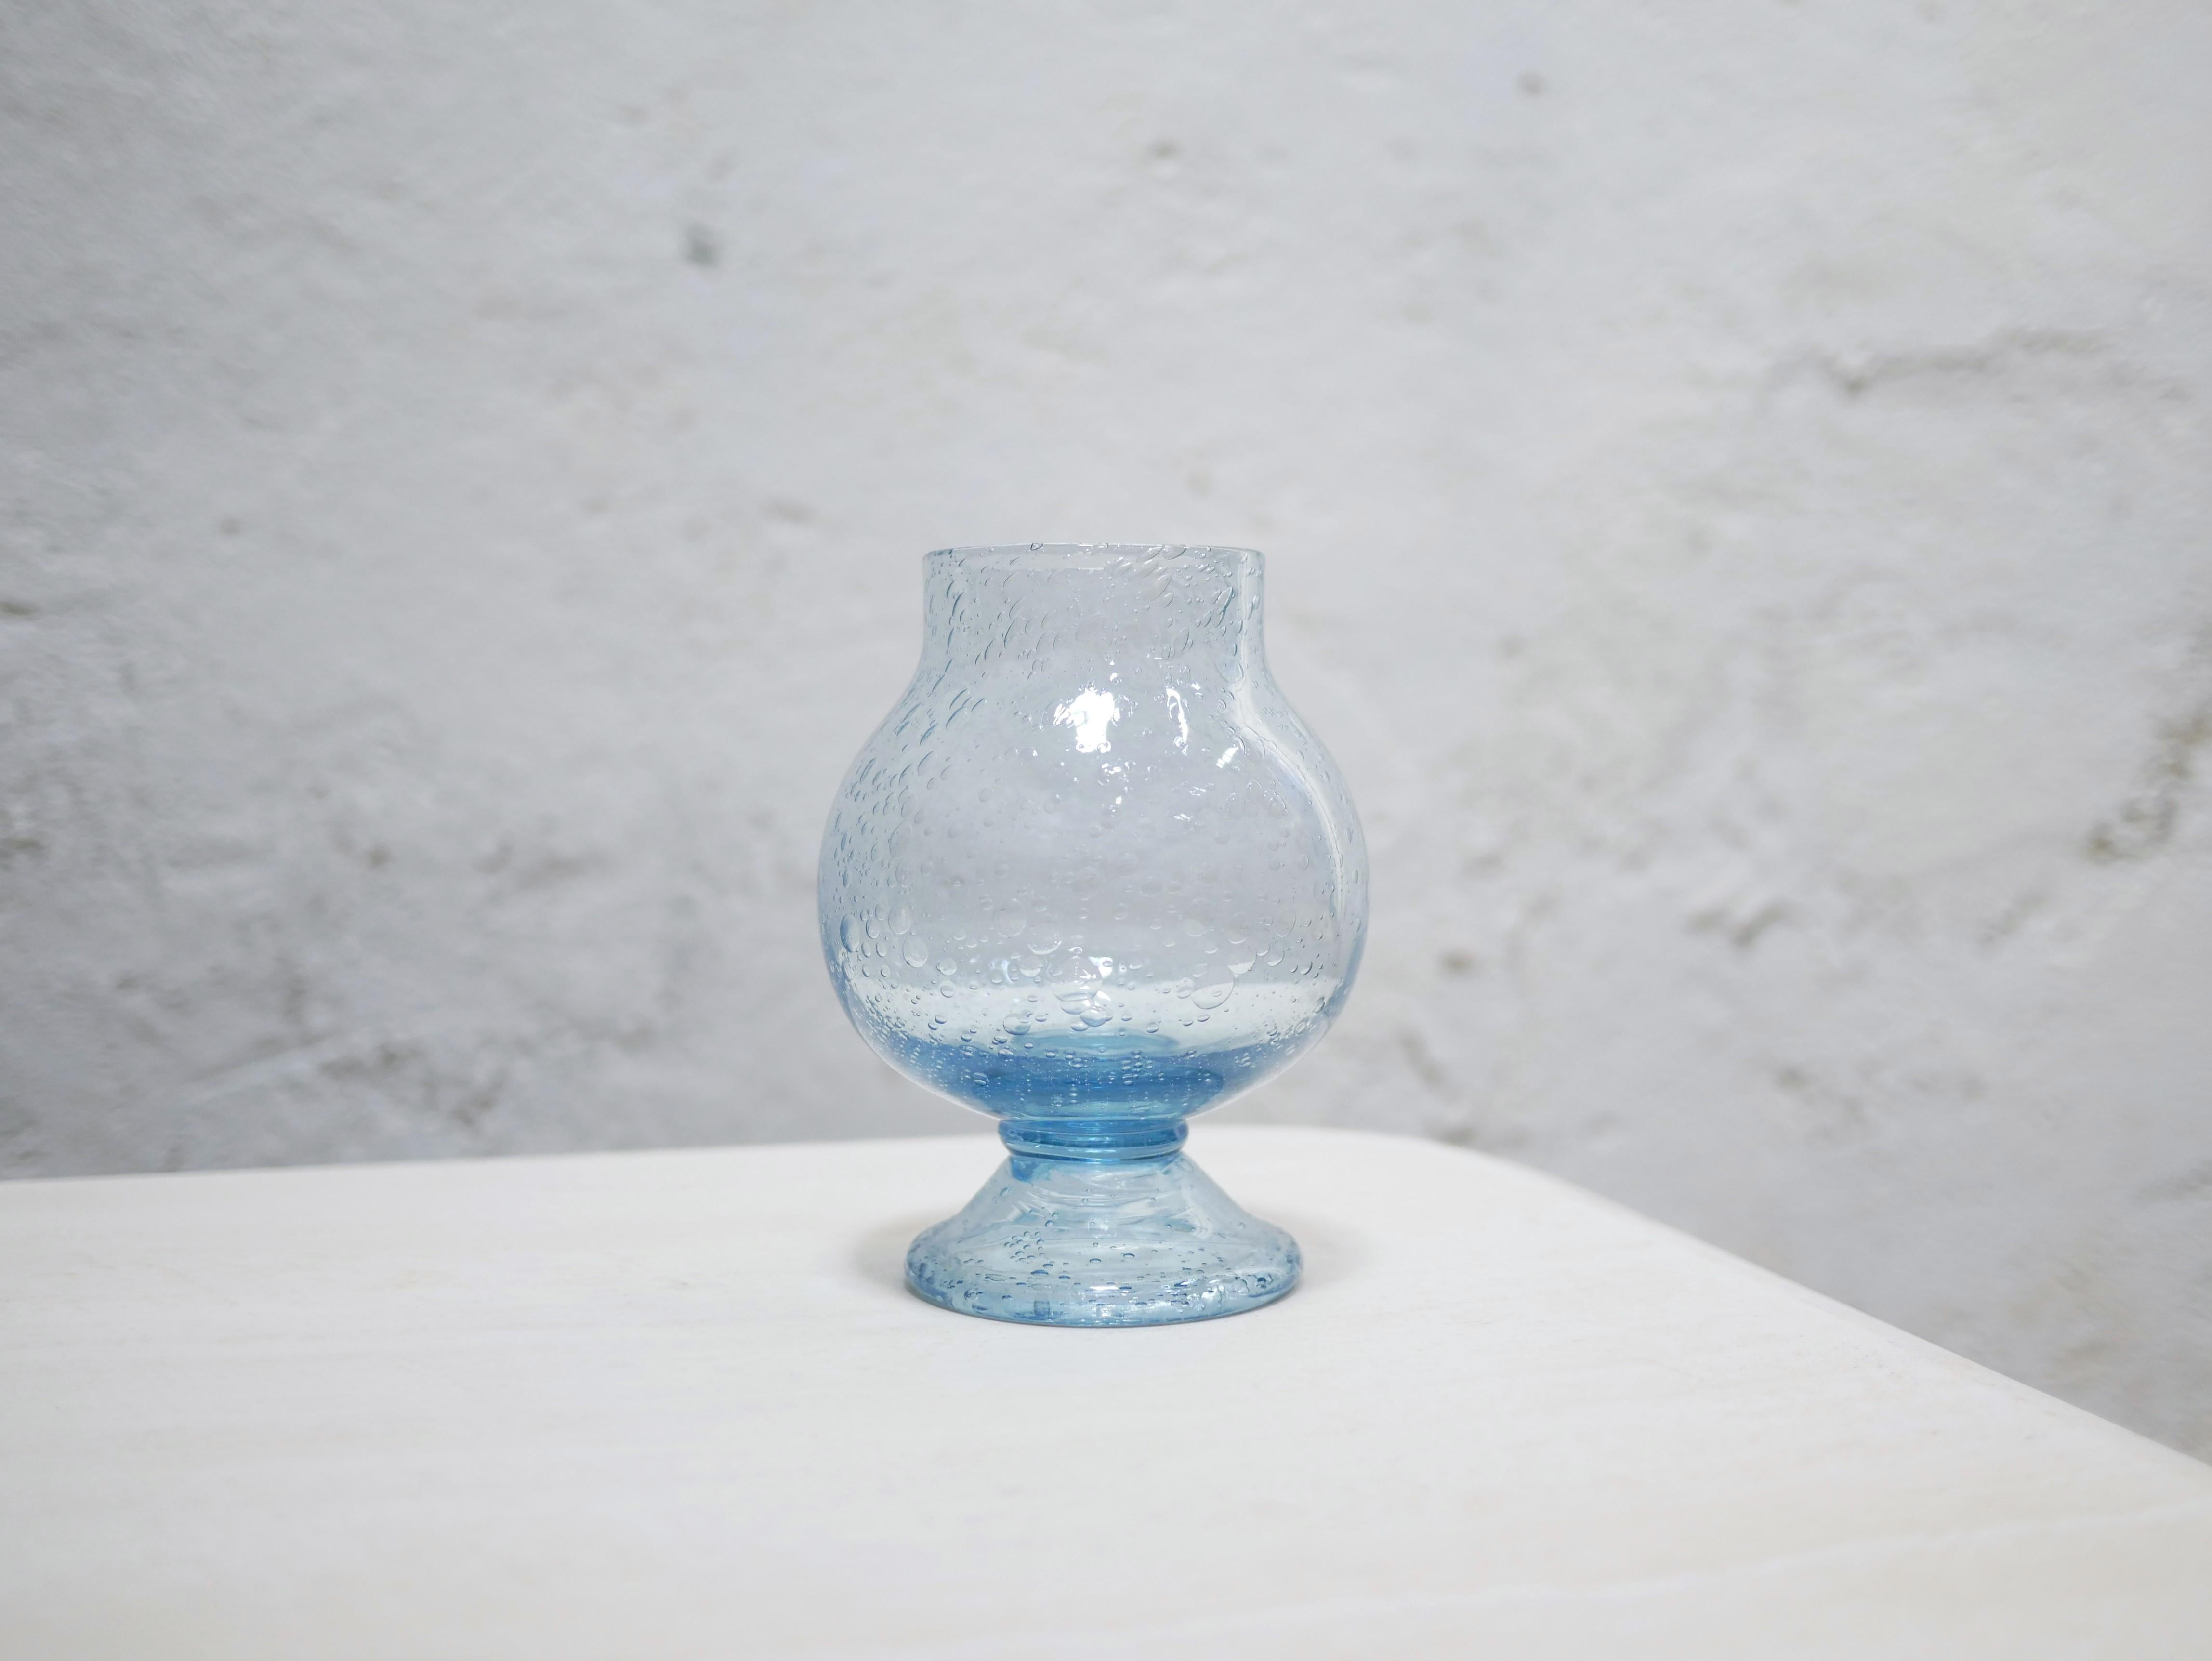 Blue blown glass tealight holder by the Biot glassworks dating from the 1960s.

Ideal for decoration, its bubbled glass and its luminous blue tint will bring softness and warmth. Beautifully sized, alone or combined with other objects, it will give